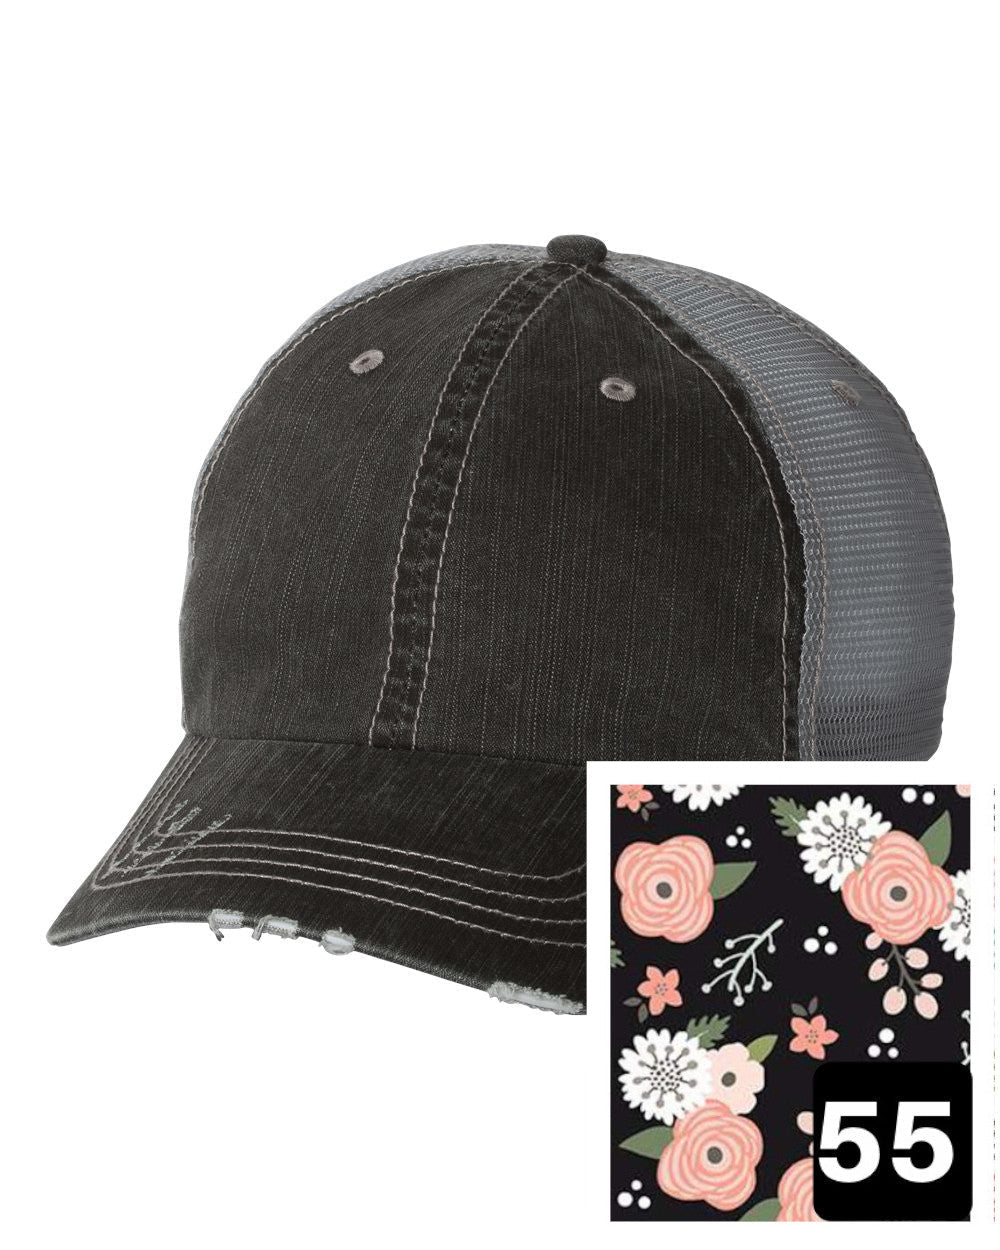 gray distressed trucker hat with petite floral on navy fabric state of Washington